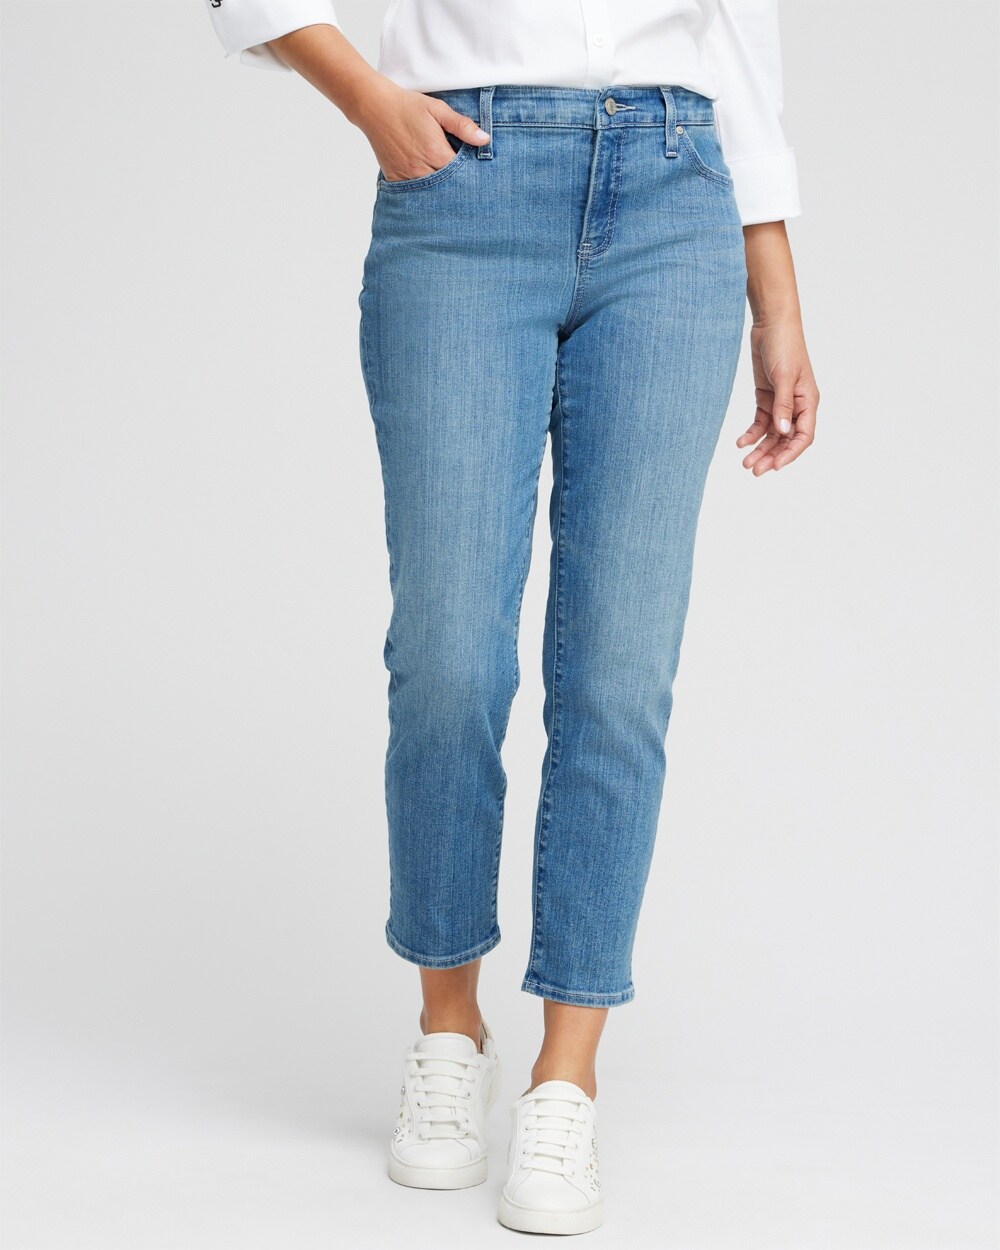 Chico's Girlfriend Cropped Jeans In Light Wash Denim